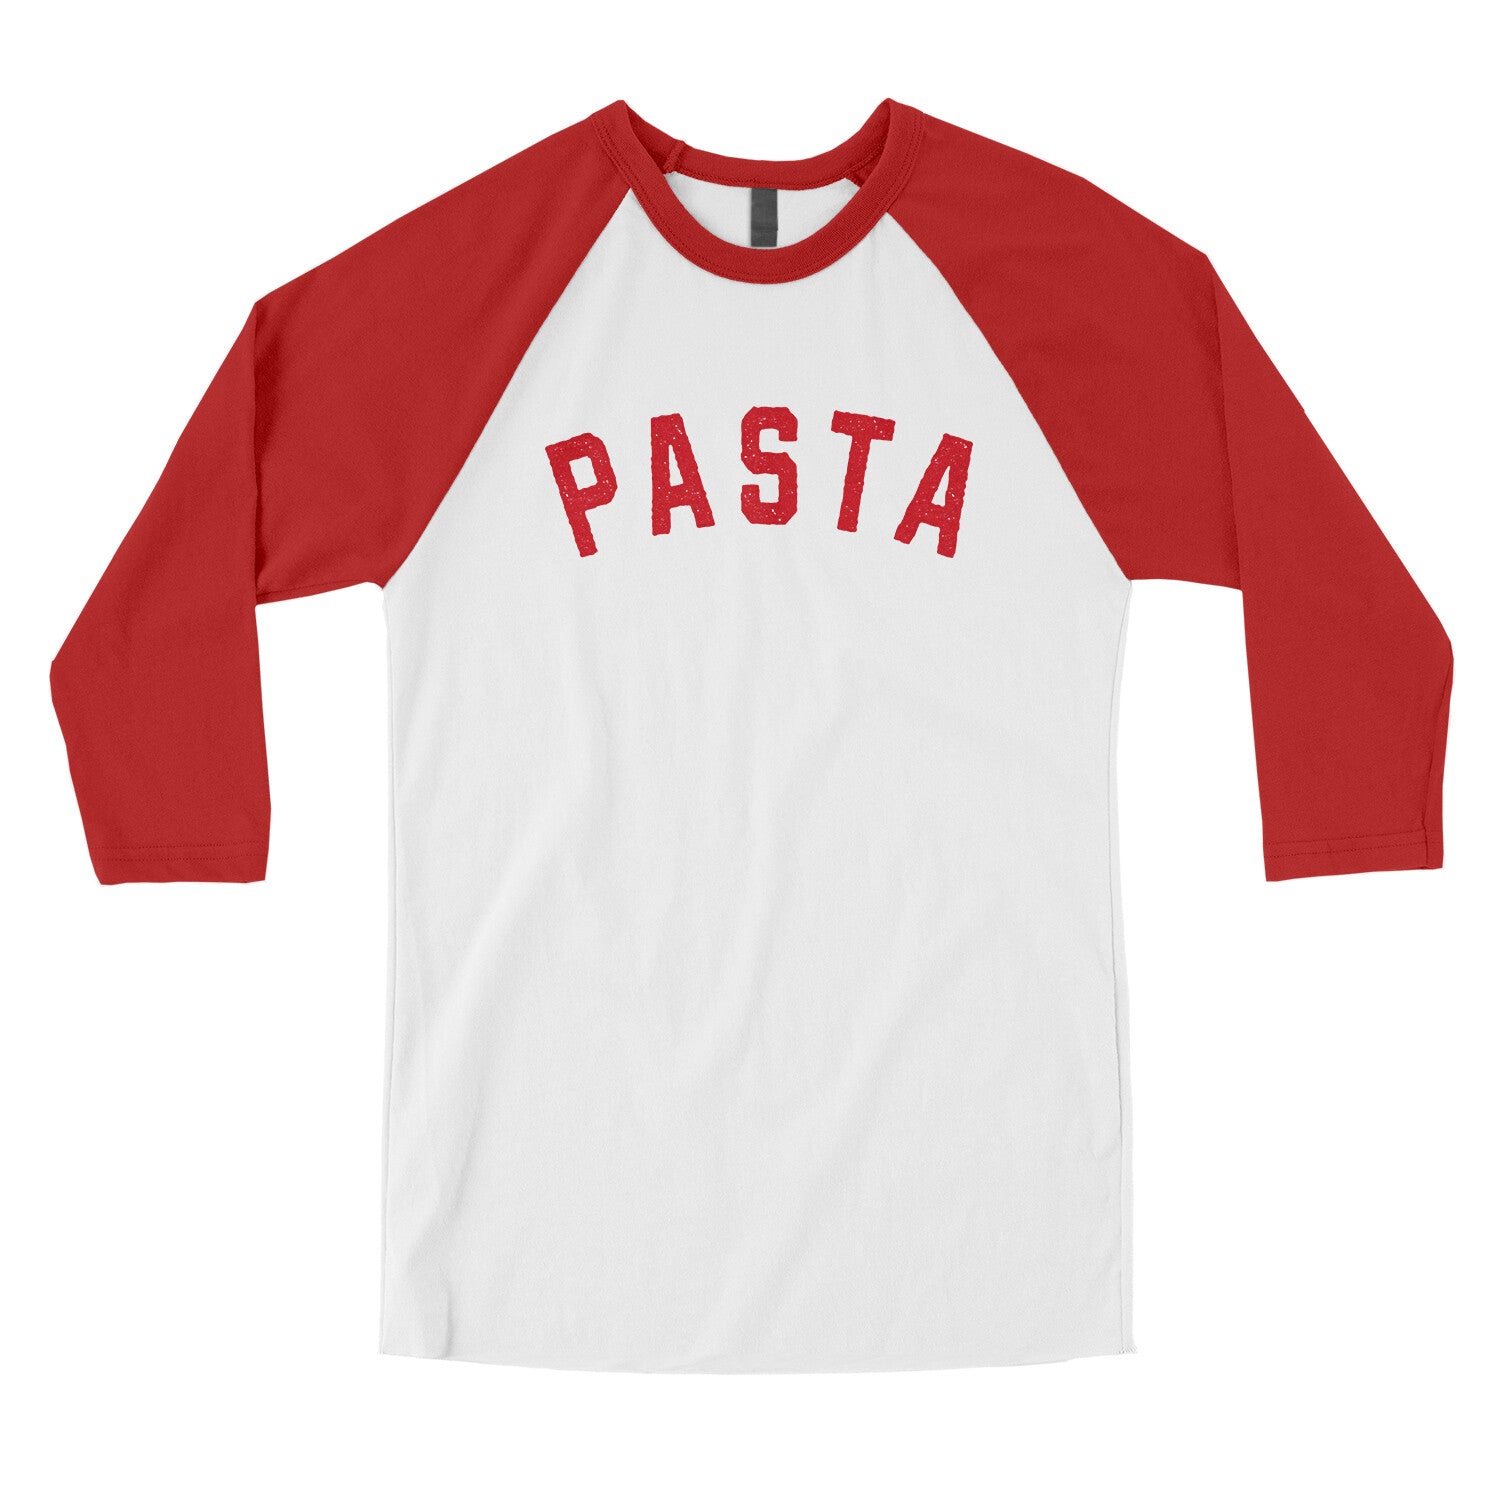 Pasta in White with Red Color